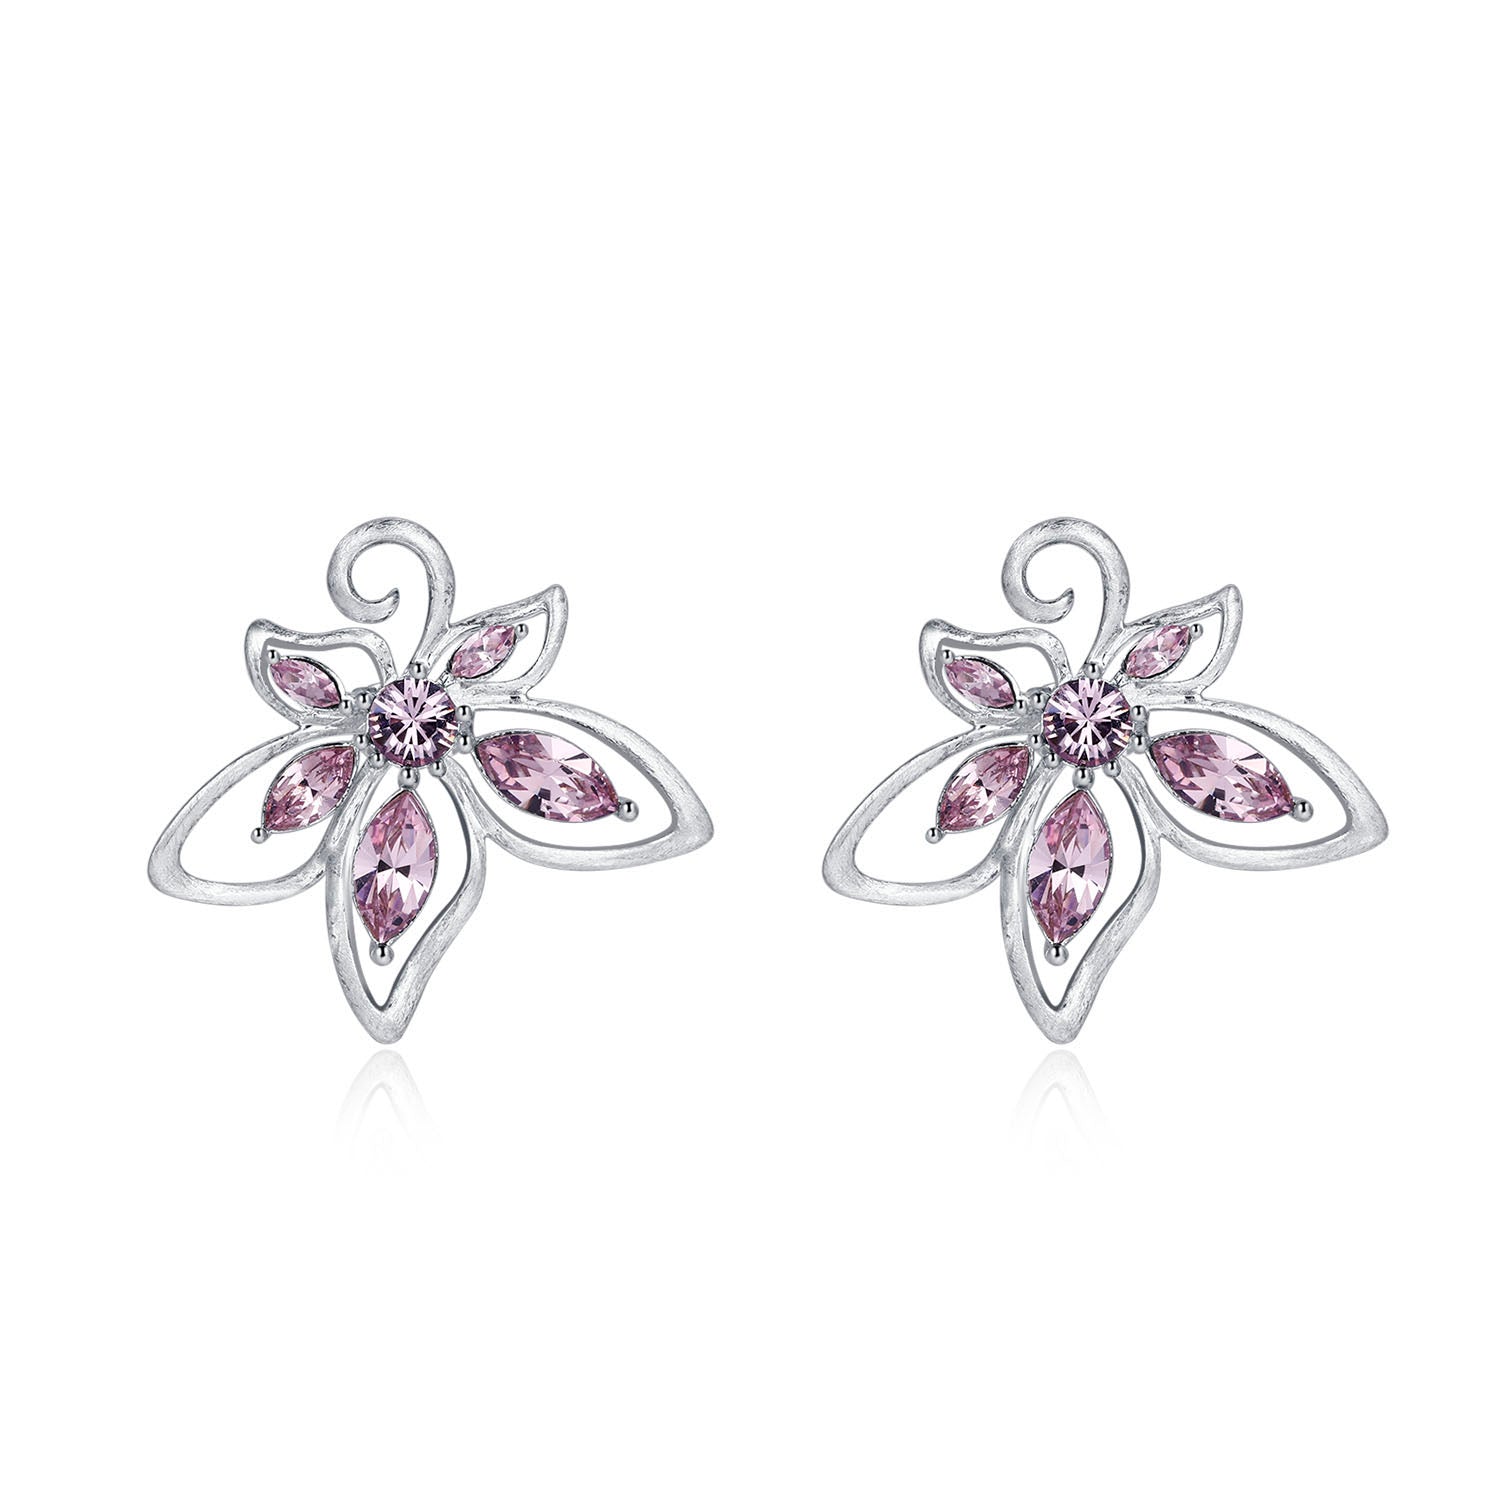 Vicacci 925 Silver Bauhinia Earrings with Swarovski Amethysts